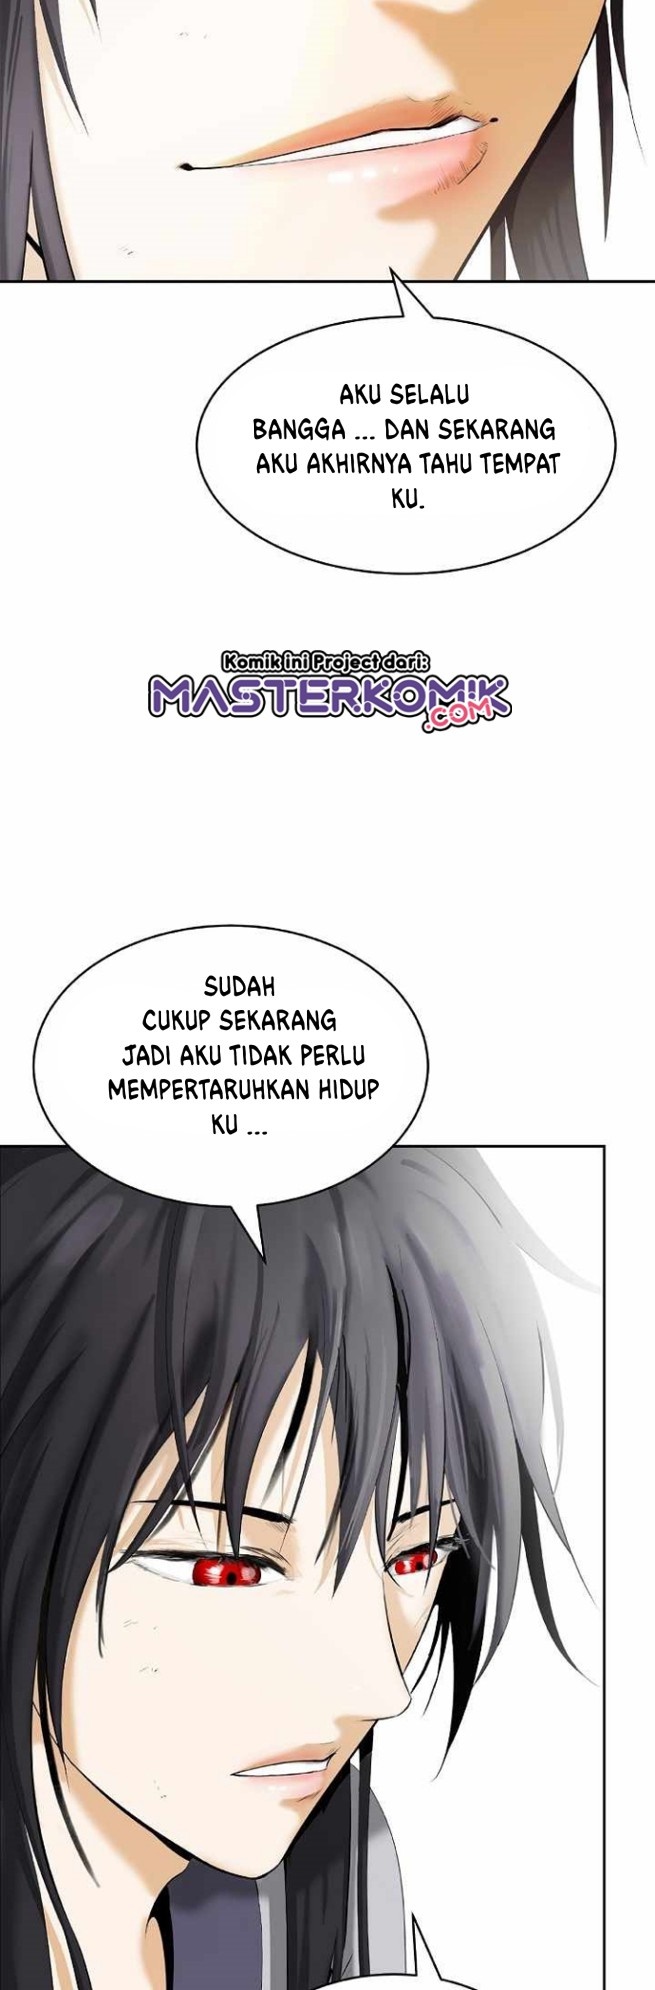 Cystic Story Chapter 45 47